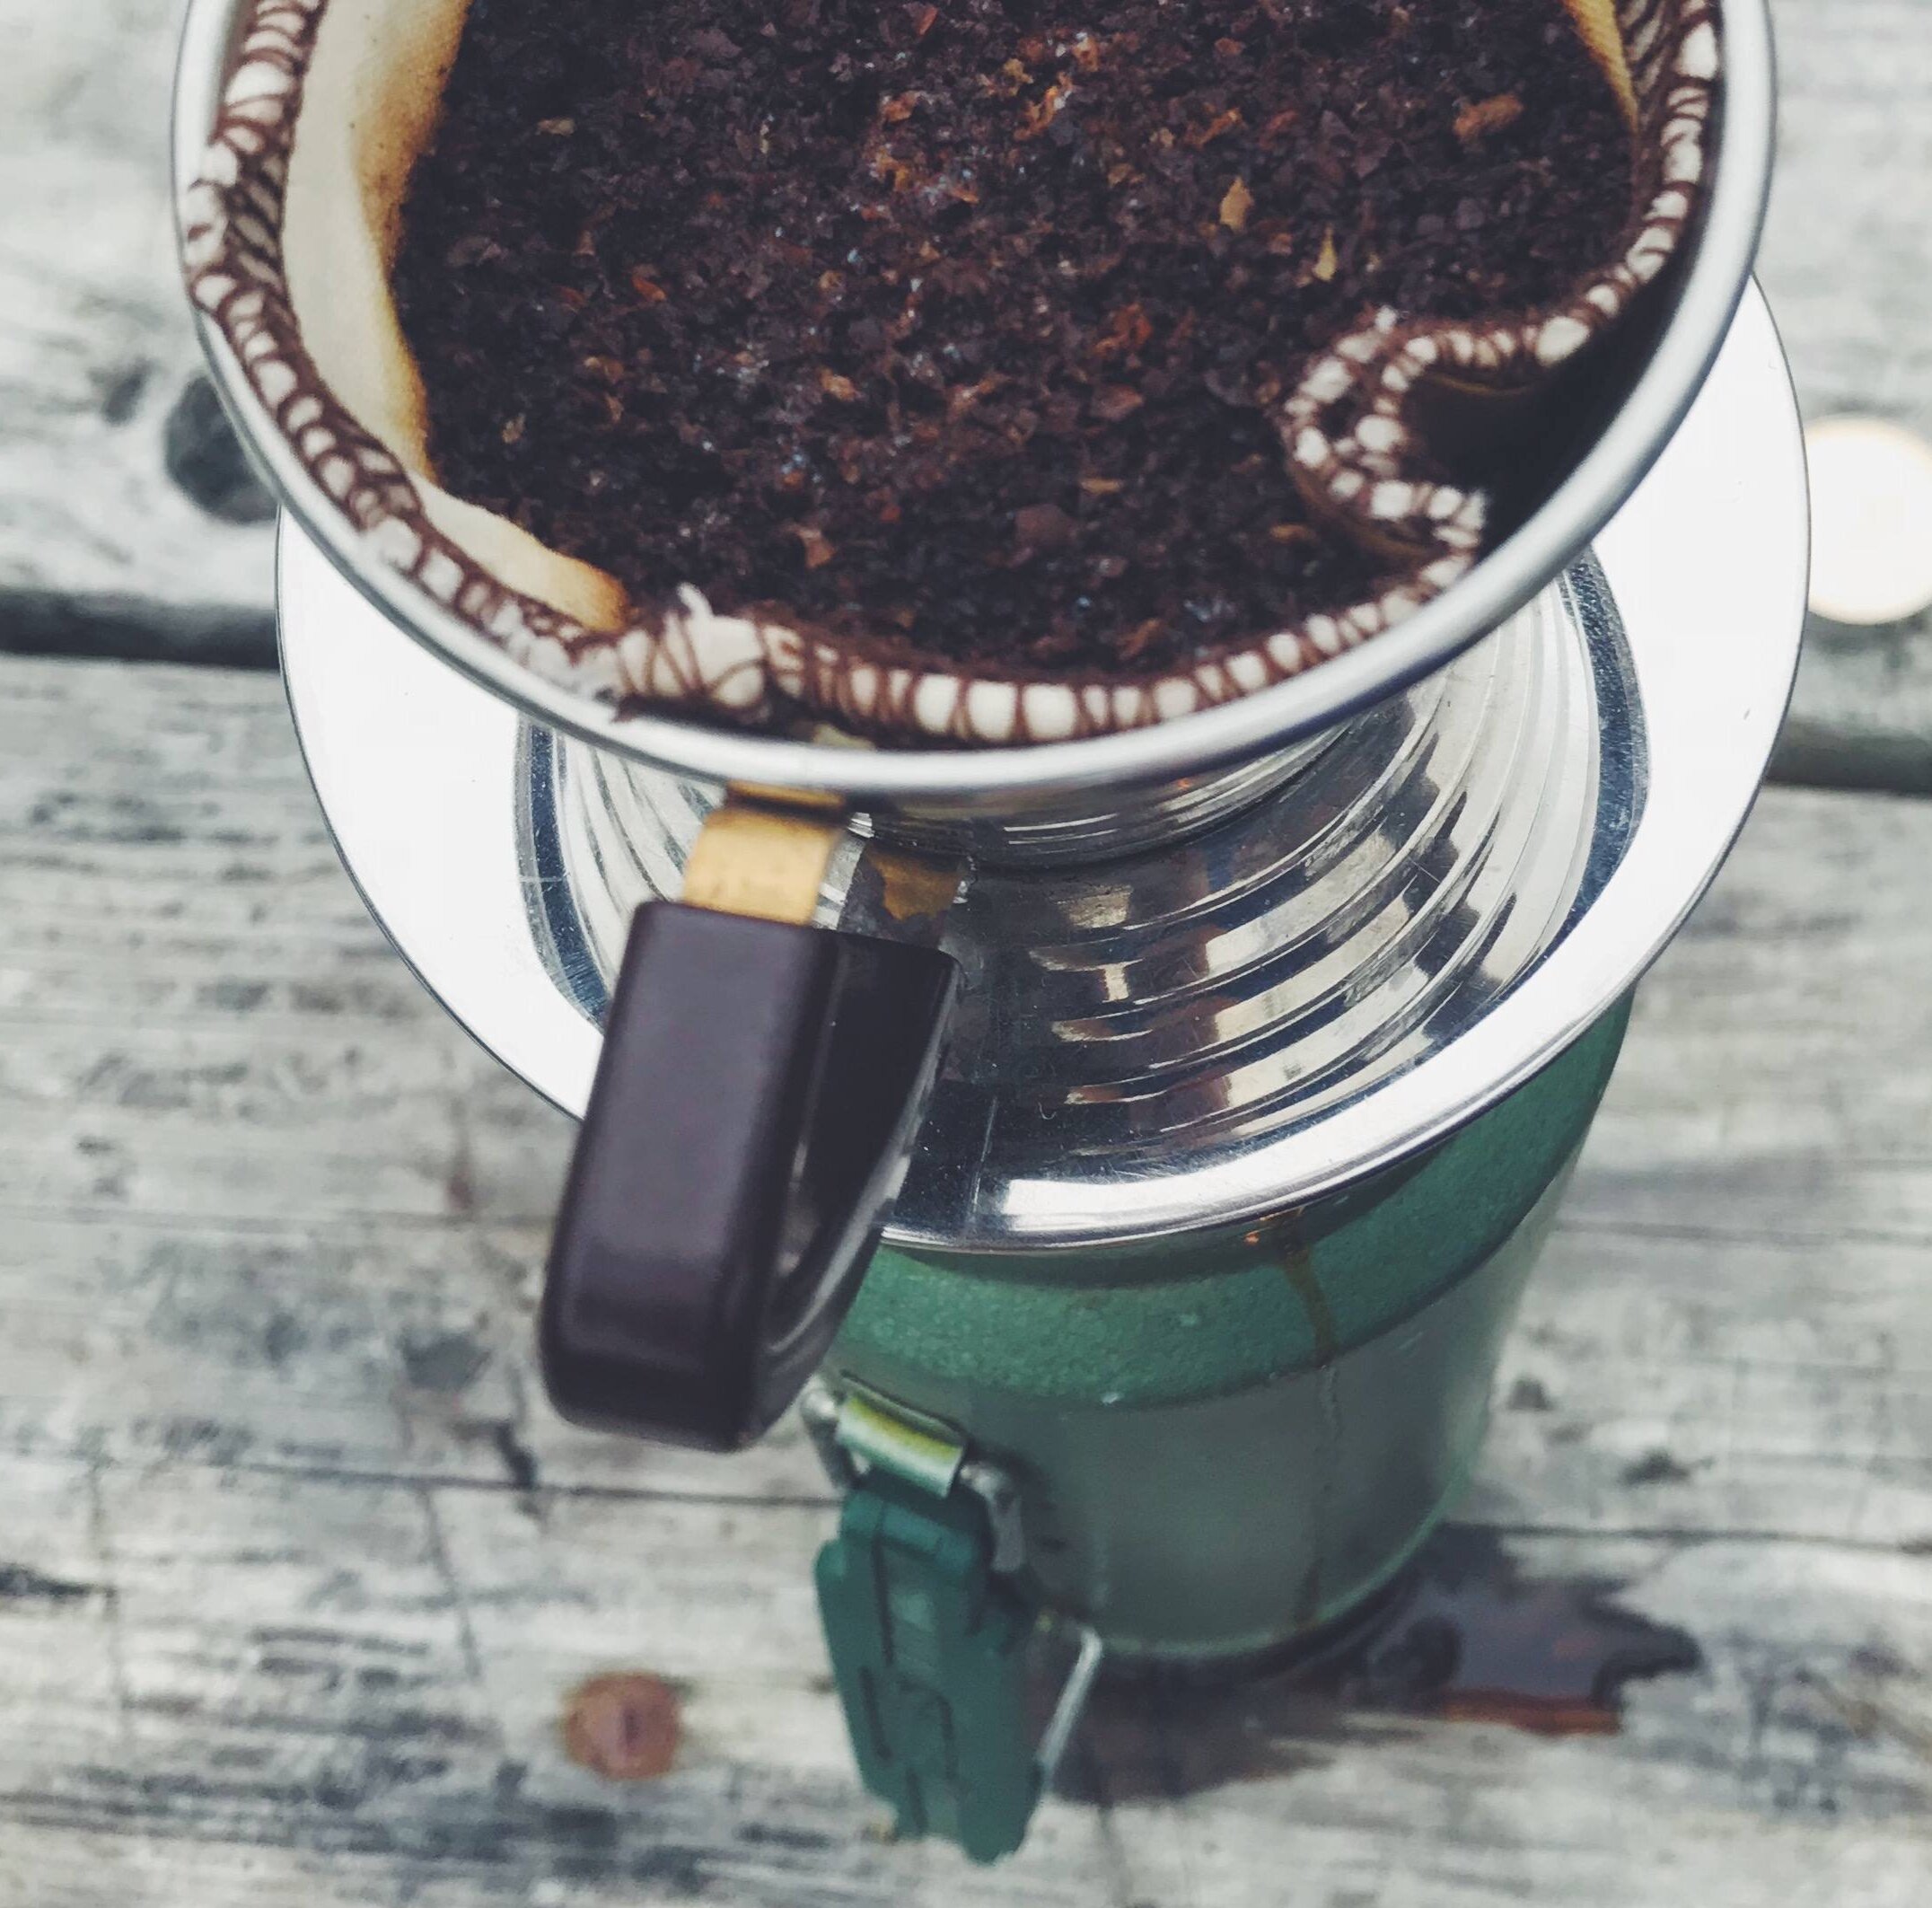 https://images.squarespace-cdn.com/content/v1/56f4a20f86db433fc5a83e2b/1631465914432-ATW2WYR6W4M0SAKGFFVC/coffee+dripper+on+top+of+a+canteen+outdoors